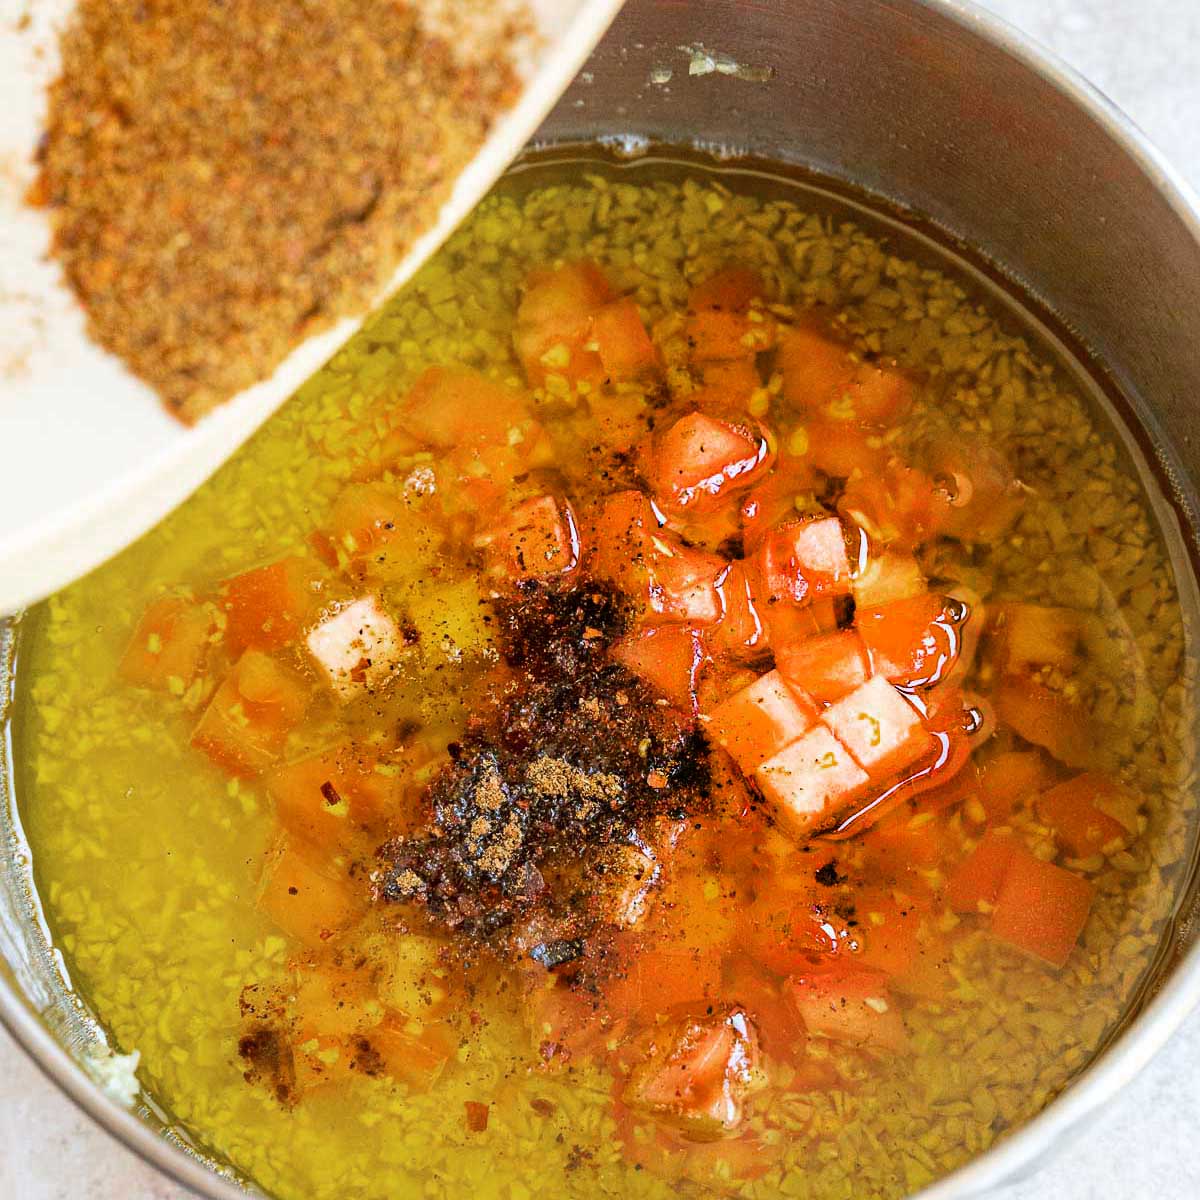 Adding the grinded spices to the pot with garlic, oil and tomatoes.